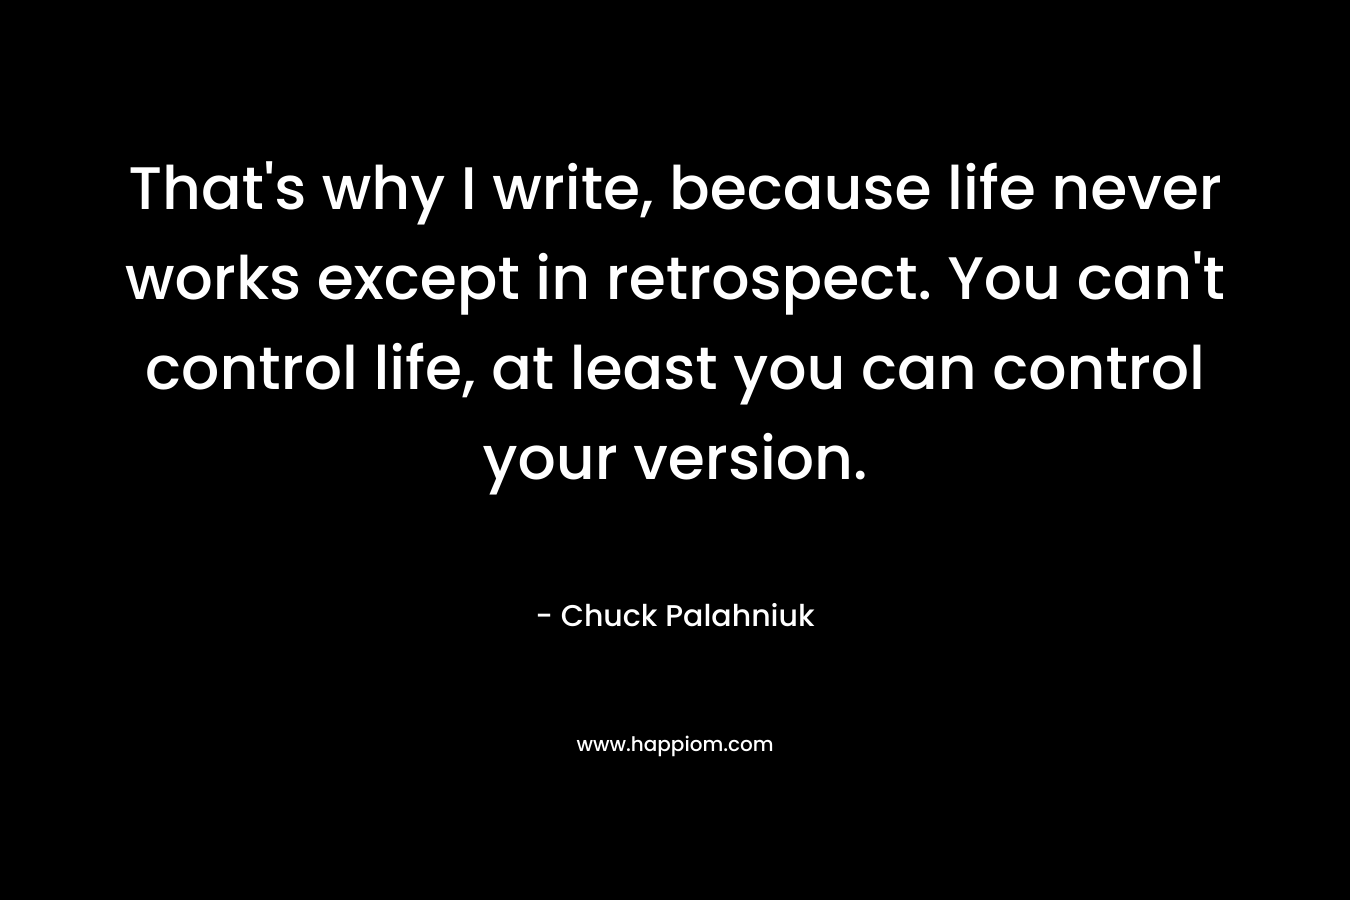 That’s why I write, because life never works except in retrospect. You can’t control life, at least you can control your version. – Chuck Palahniuk